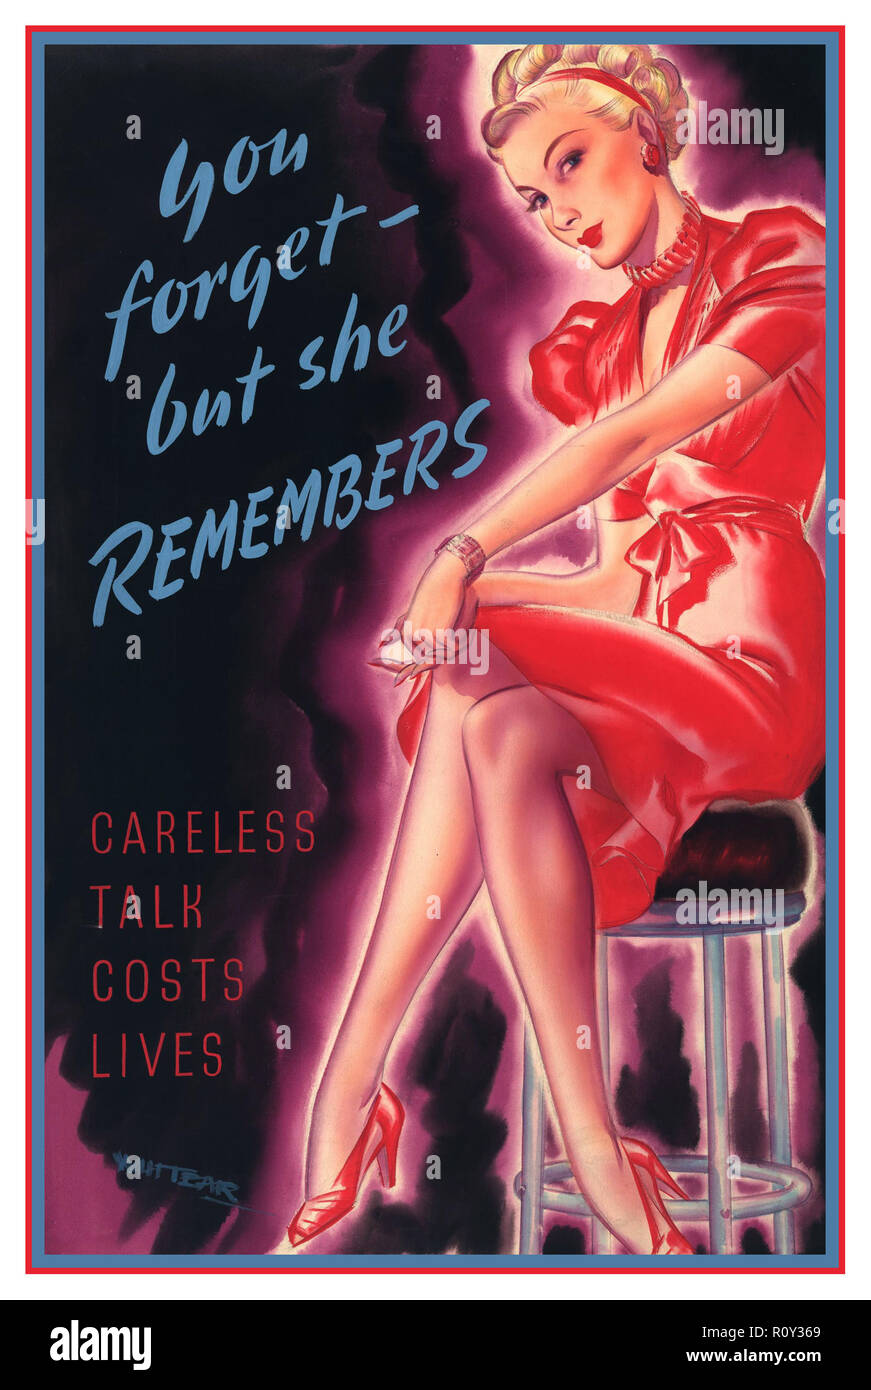 WW2 Vintage UK Propaganda Information Poster 'You forget - but she remembers'  'Careless talk costs lives' World War 2 Stock Photo